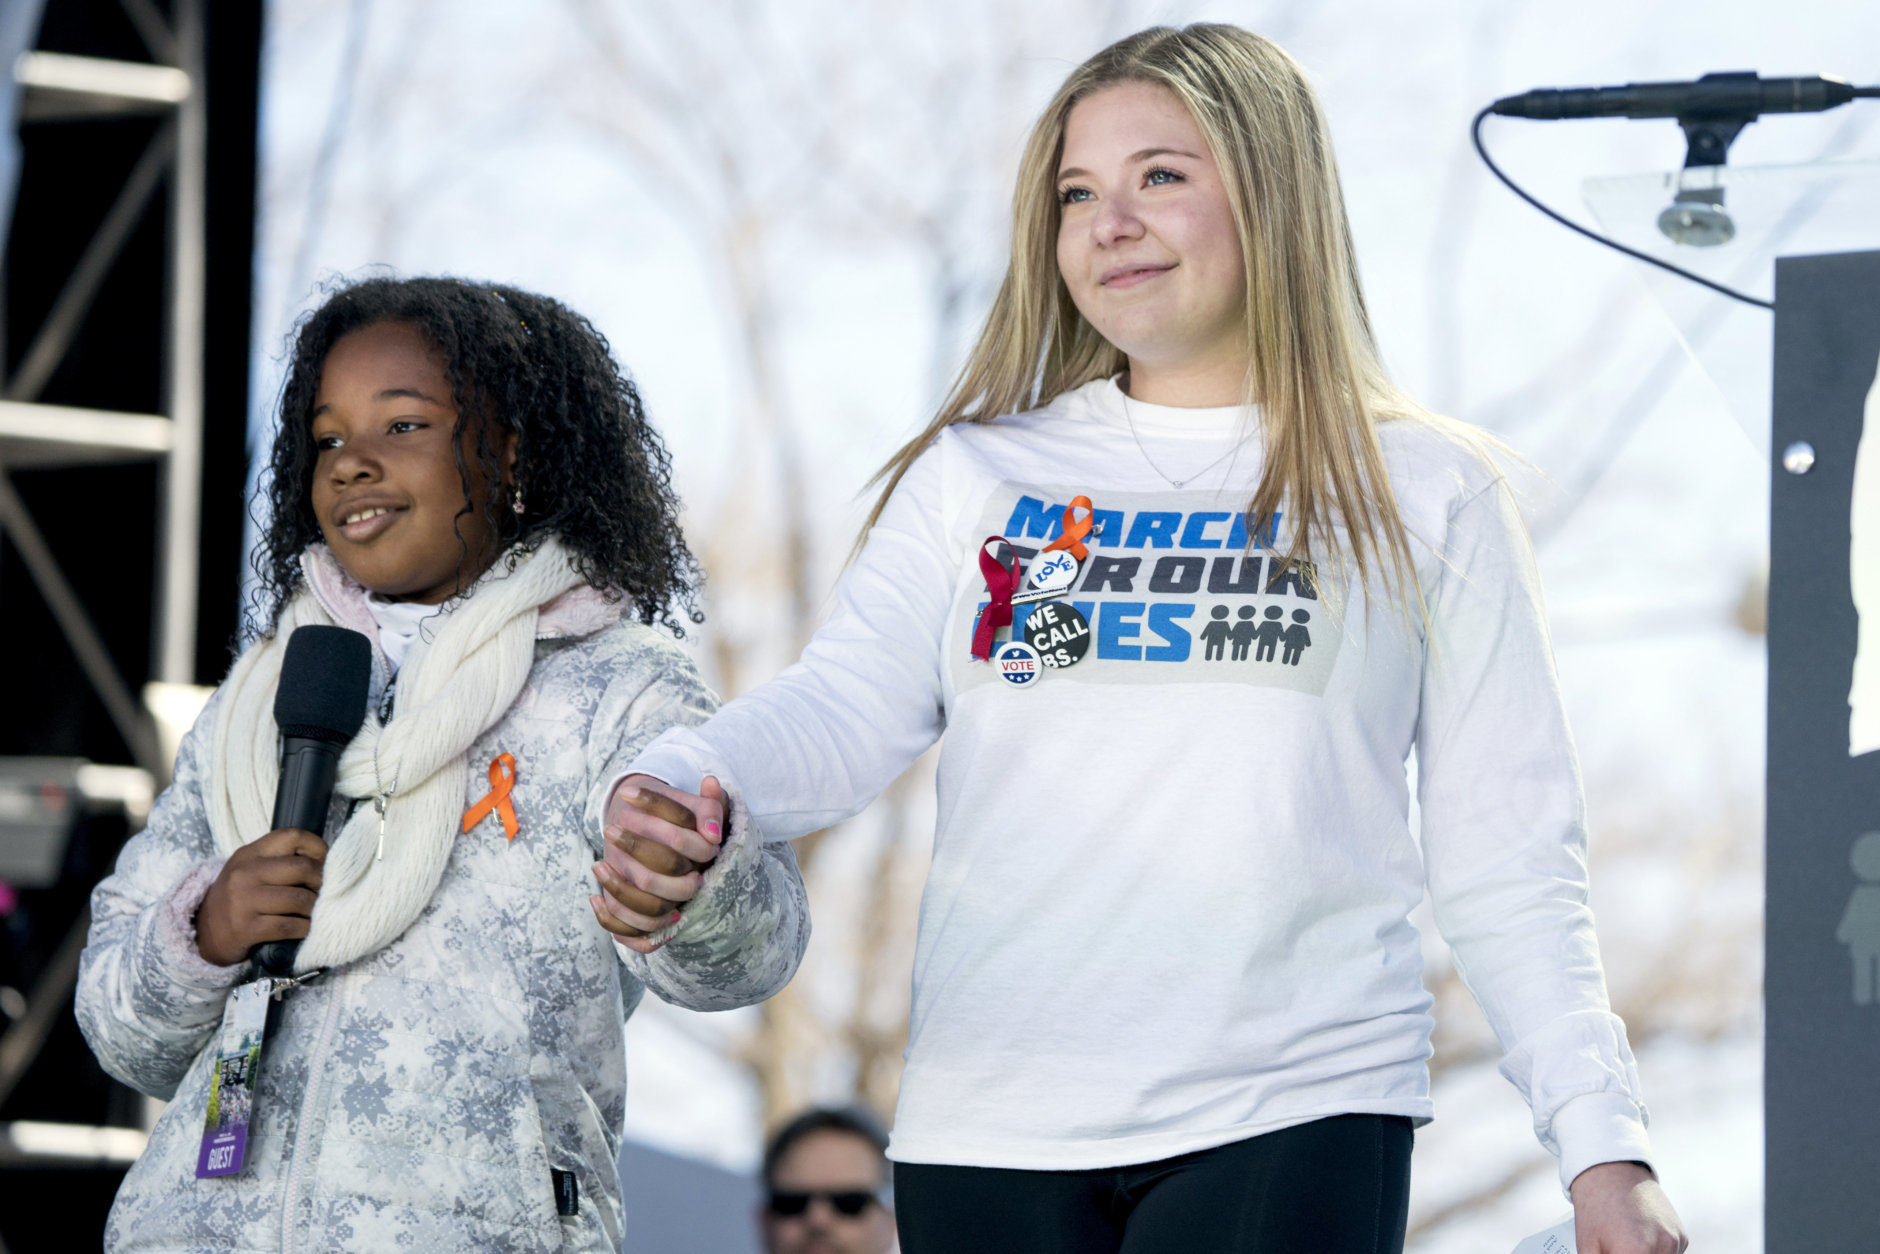 Yolanda Renee King, grand daughter of Martin Luther King Jr., left, accompanied by Jaclyn Corin, a student at Marjory Stoneman Douglas High School in Parkland, Fla., and one of the organizers of the rally, right, speaks during the "March for Our Lives" rally in support of gun control in Washington, Saturday, March 24, 2018. (AP Photo/Andrew Harnik)